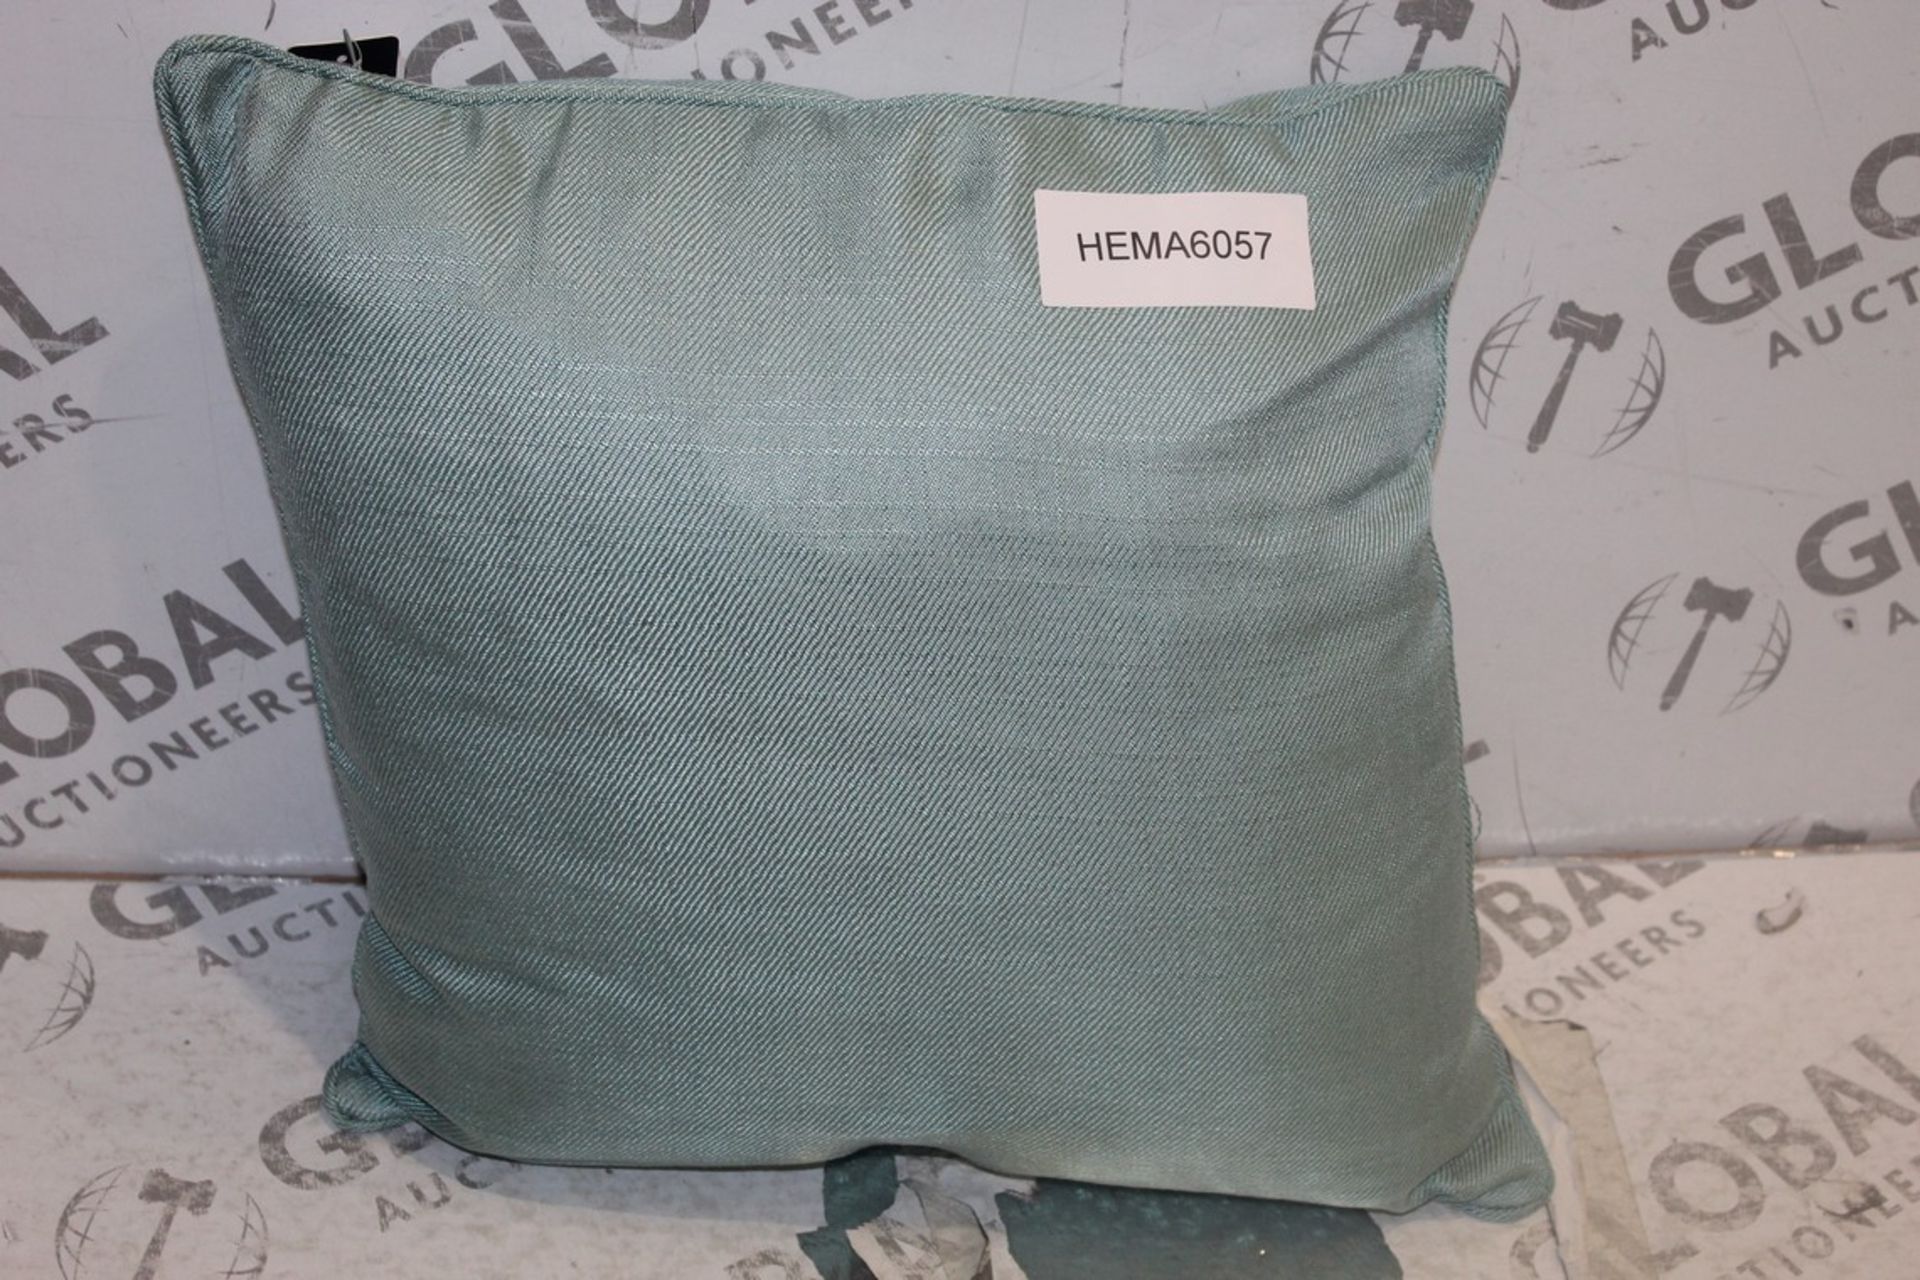 Paoletti Atlantic 45 x 45cm Scatter Cushions RRP £30 Each (12194) (Pictures Are For Illustration